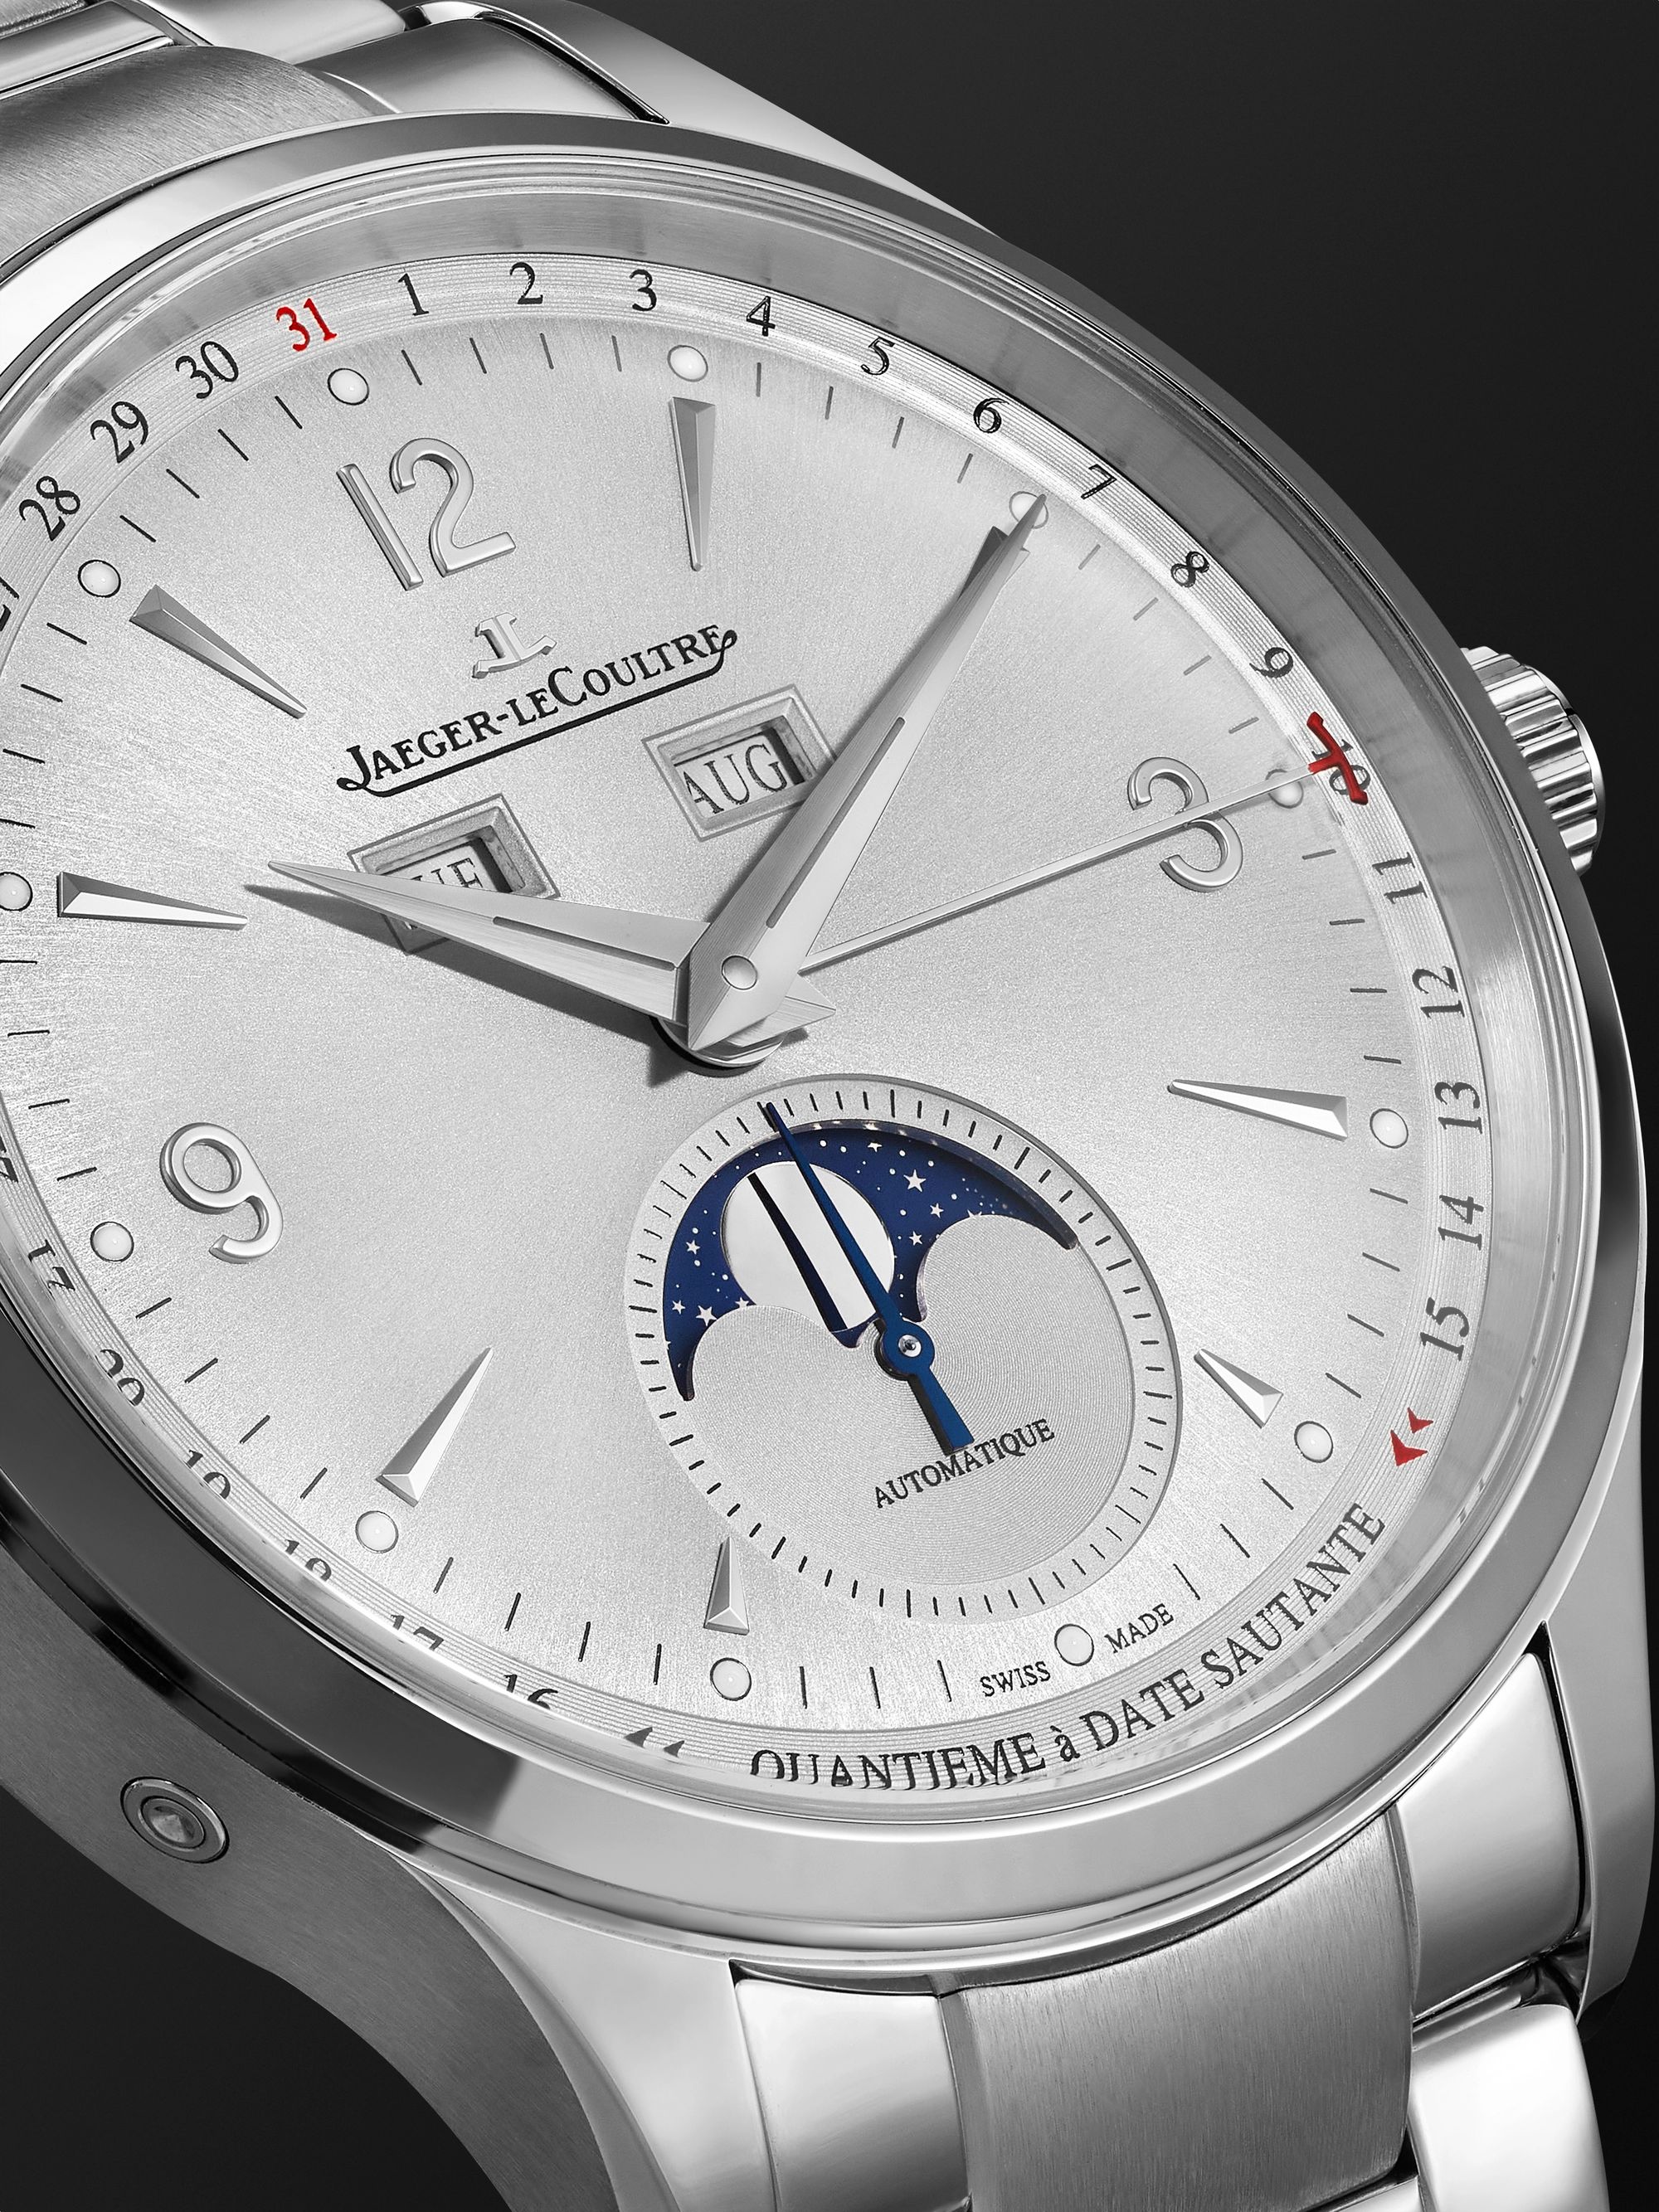 JAEGER-LECOULTRE Master Control Automatic Moon-Phase 40mm Stainless Steel Watch, Ref. No. Q4148120